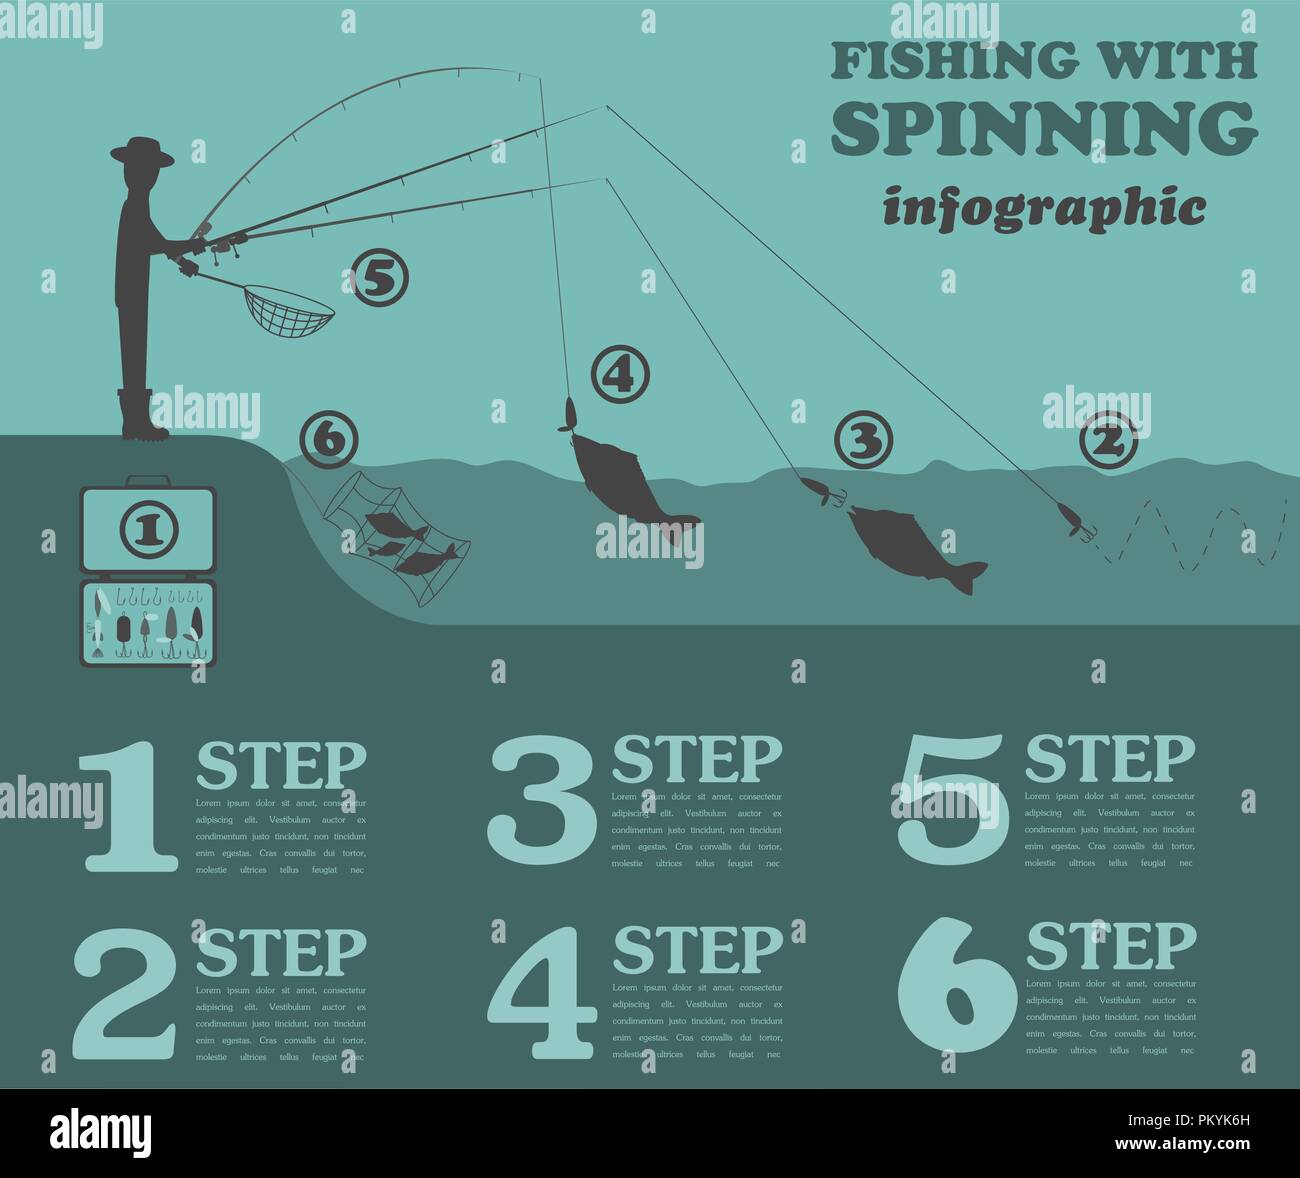 Fishing infographic. Fishing with spinning. Set elements for creating your own infographic design. Vector illustration Stock Vector